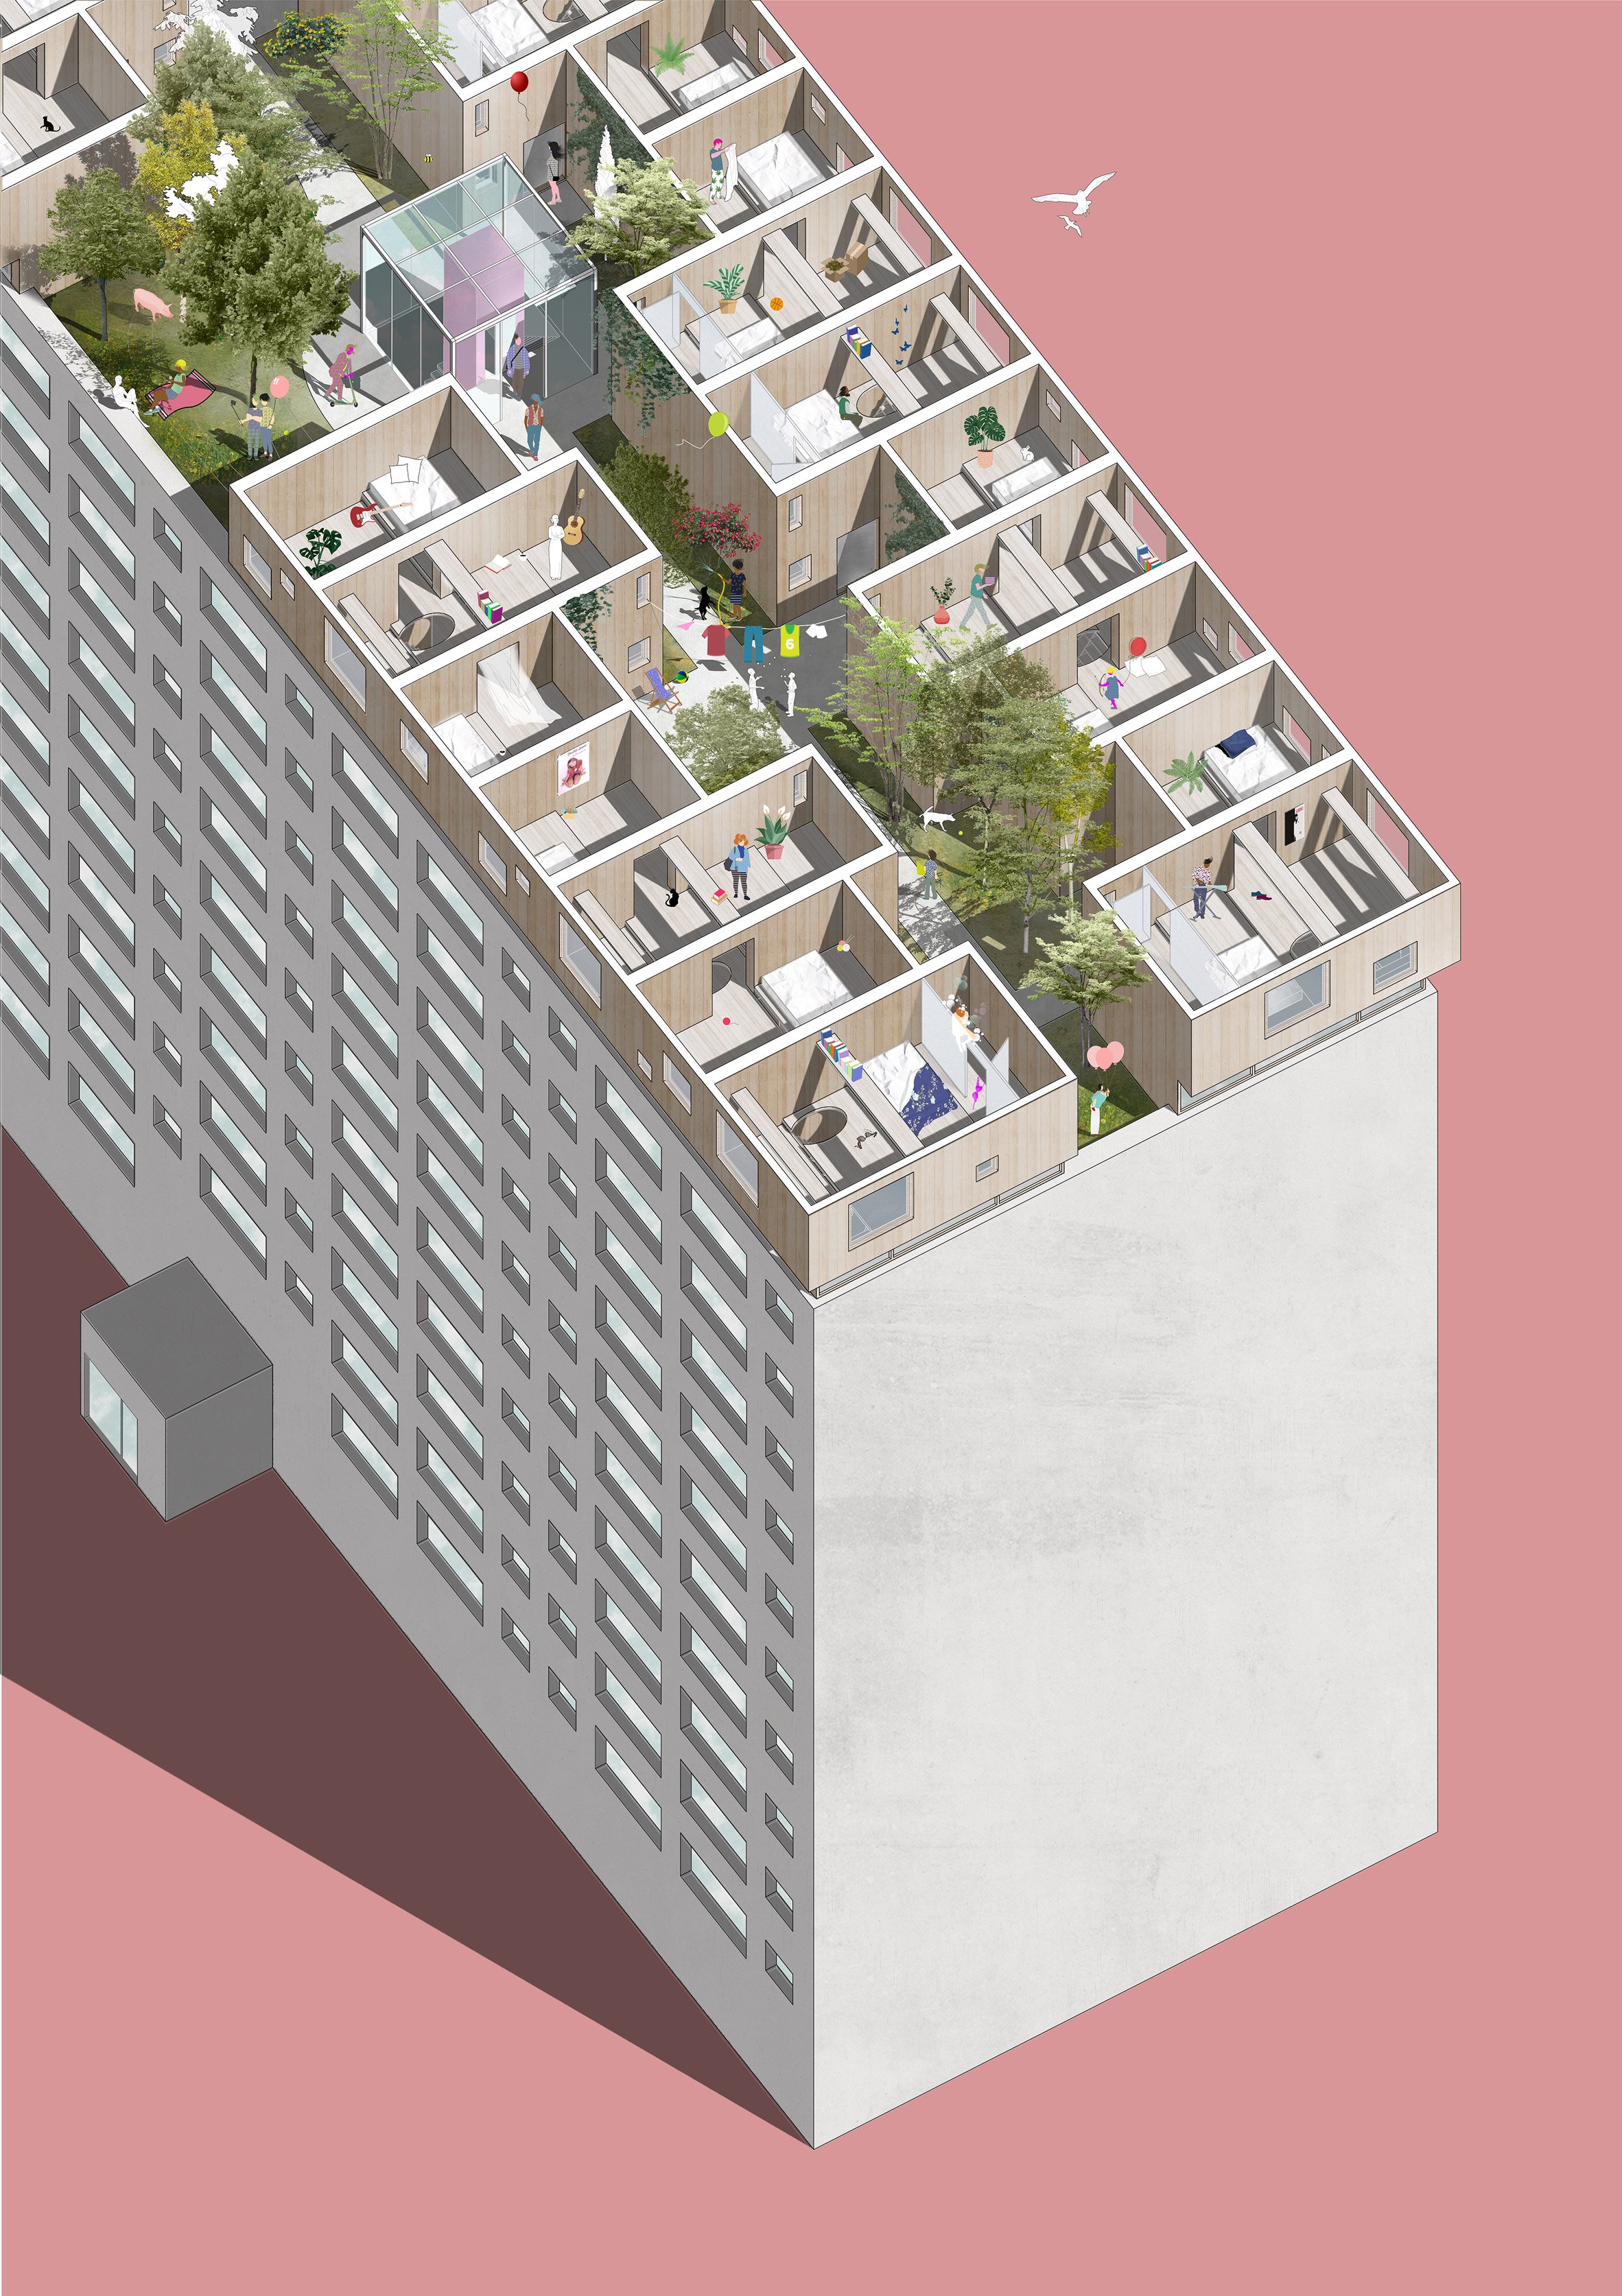 Danish architect Sigurd Larsen has designed a proposal for modular housing installed on a Berlin rooftop